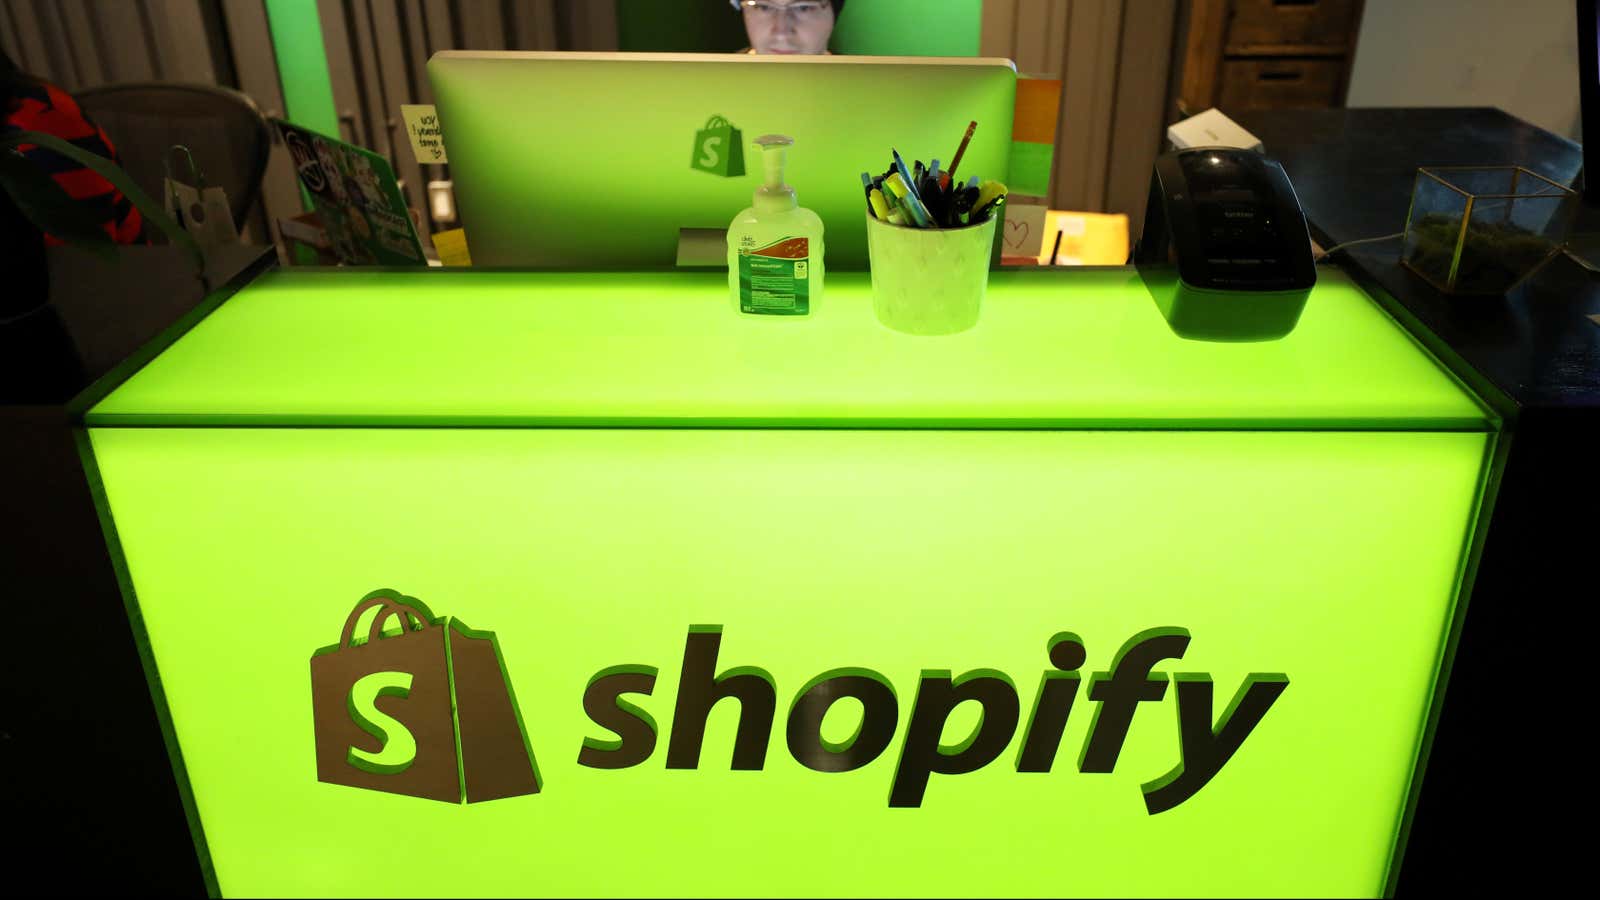 Shopify doesn’t bill itself as a direct competitor to Amazon, but happily presents itself as a counterbalance at least.